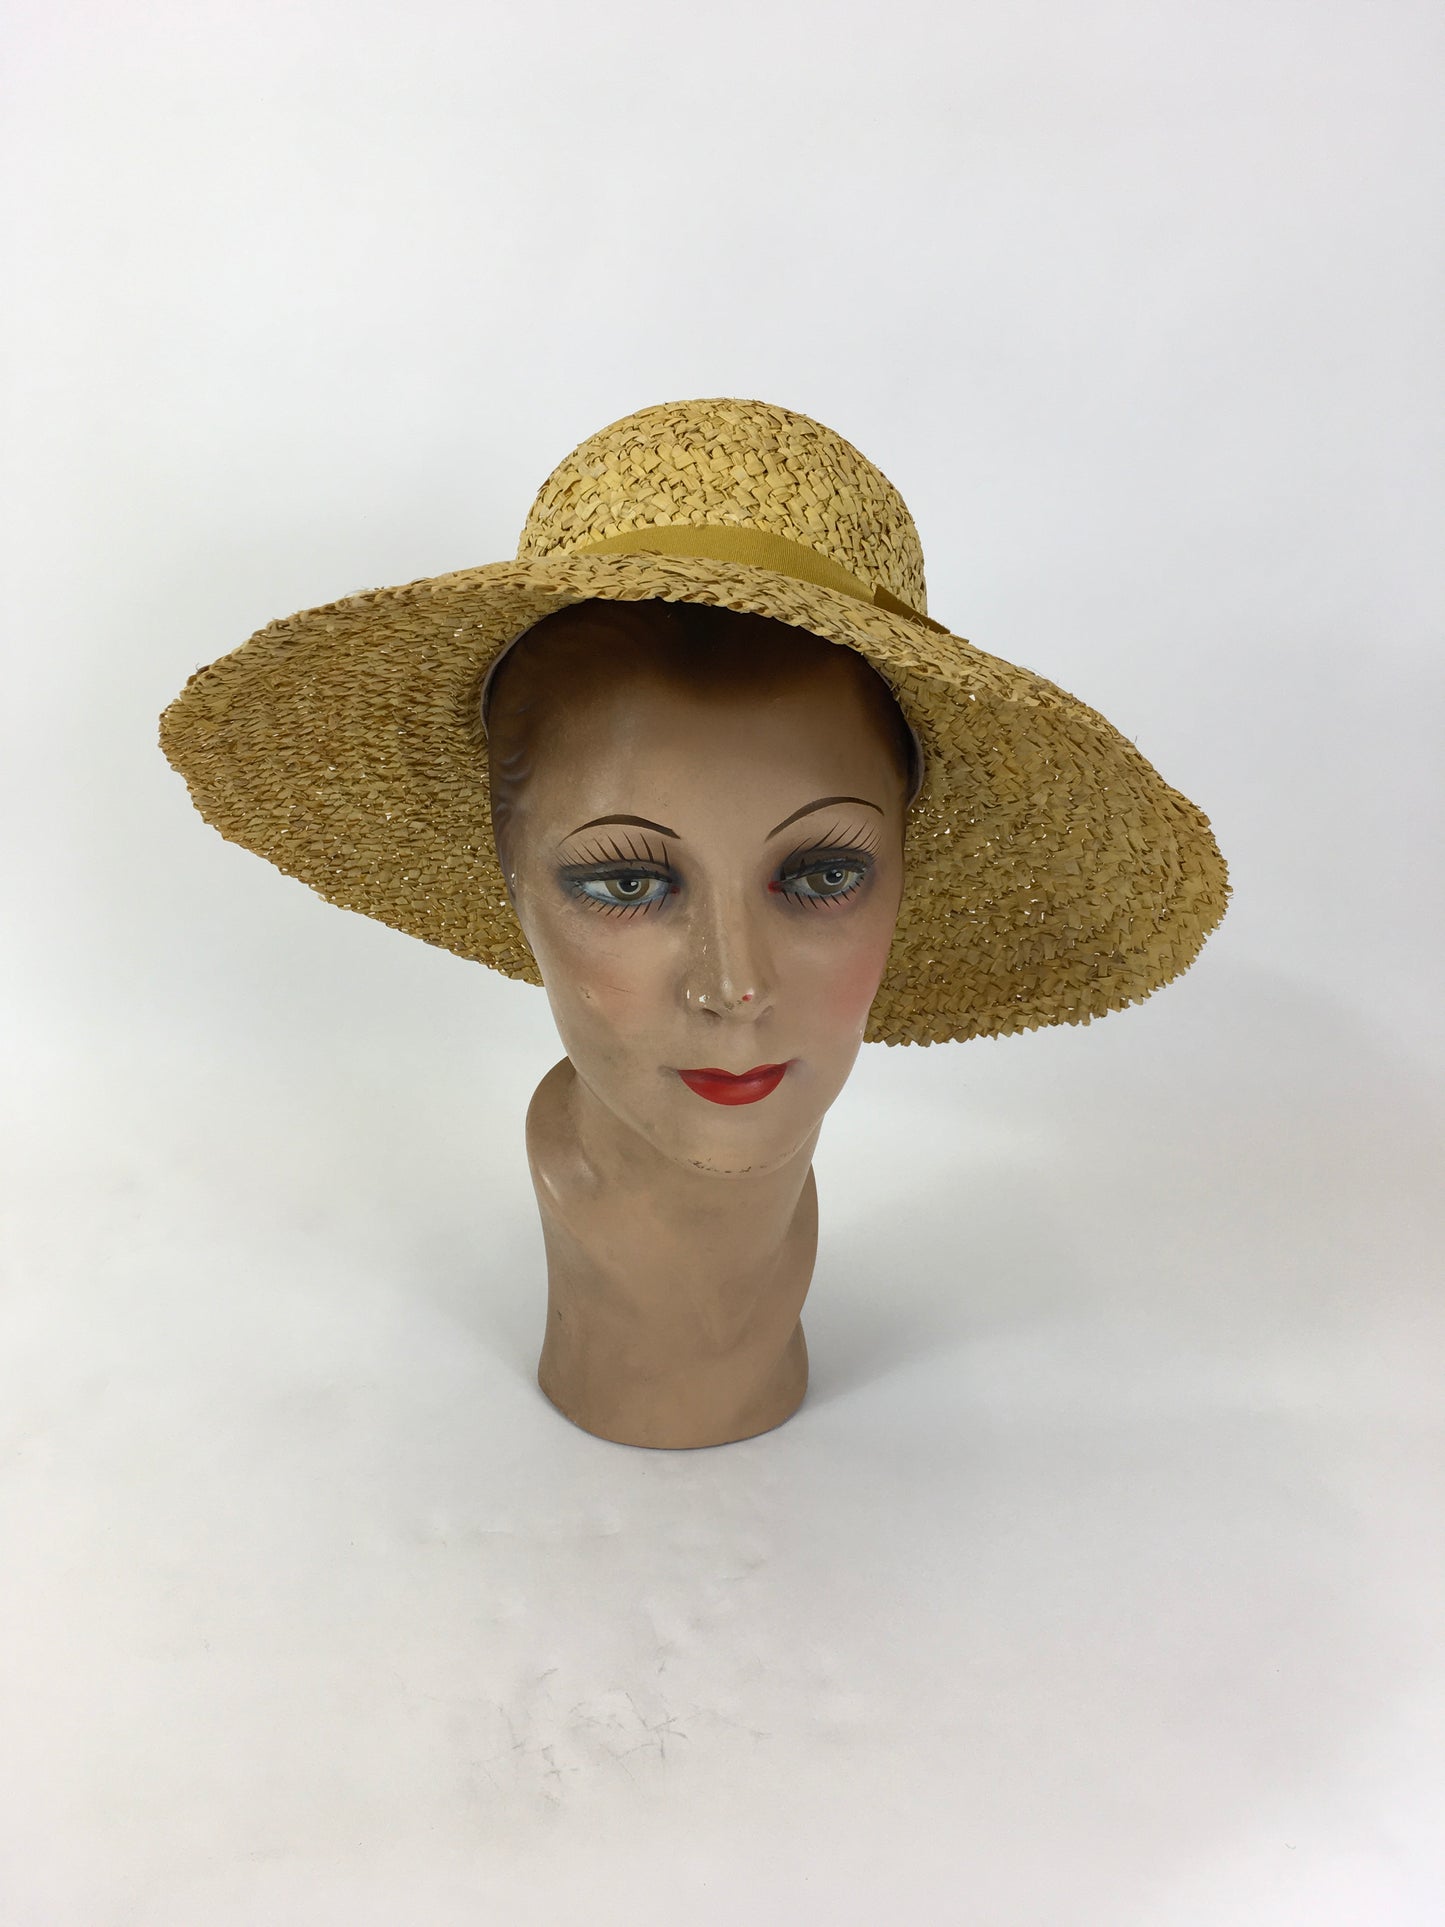 Original Early 1930’s Sensational Raffia Straw Hat - In Sunshine Yellow With Ribbon Trimming